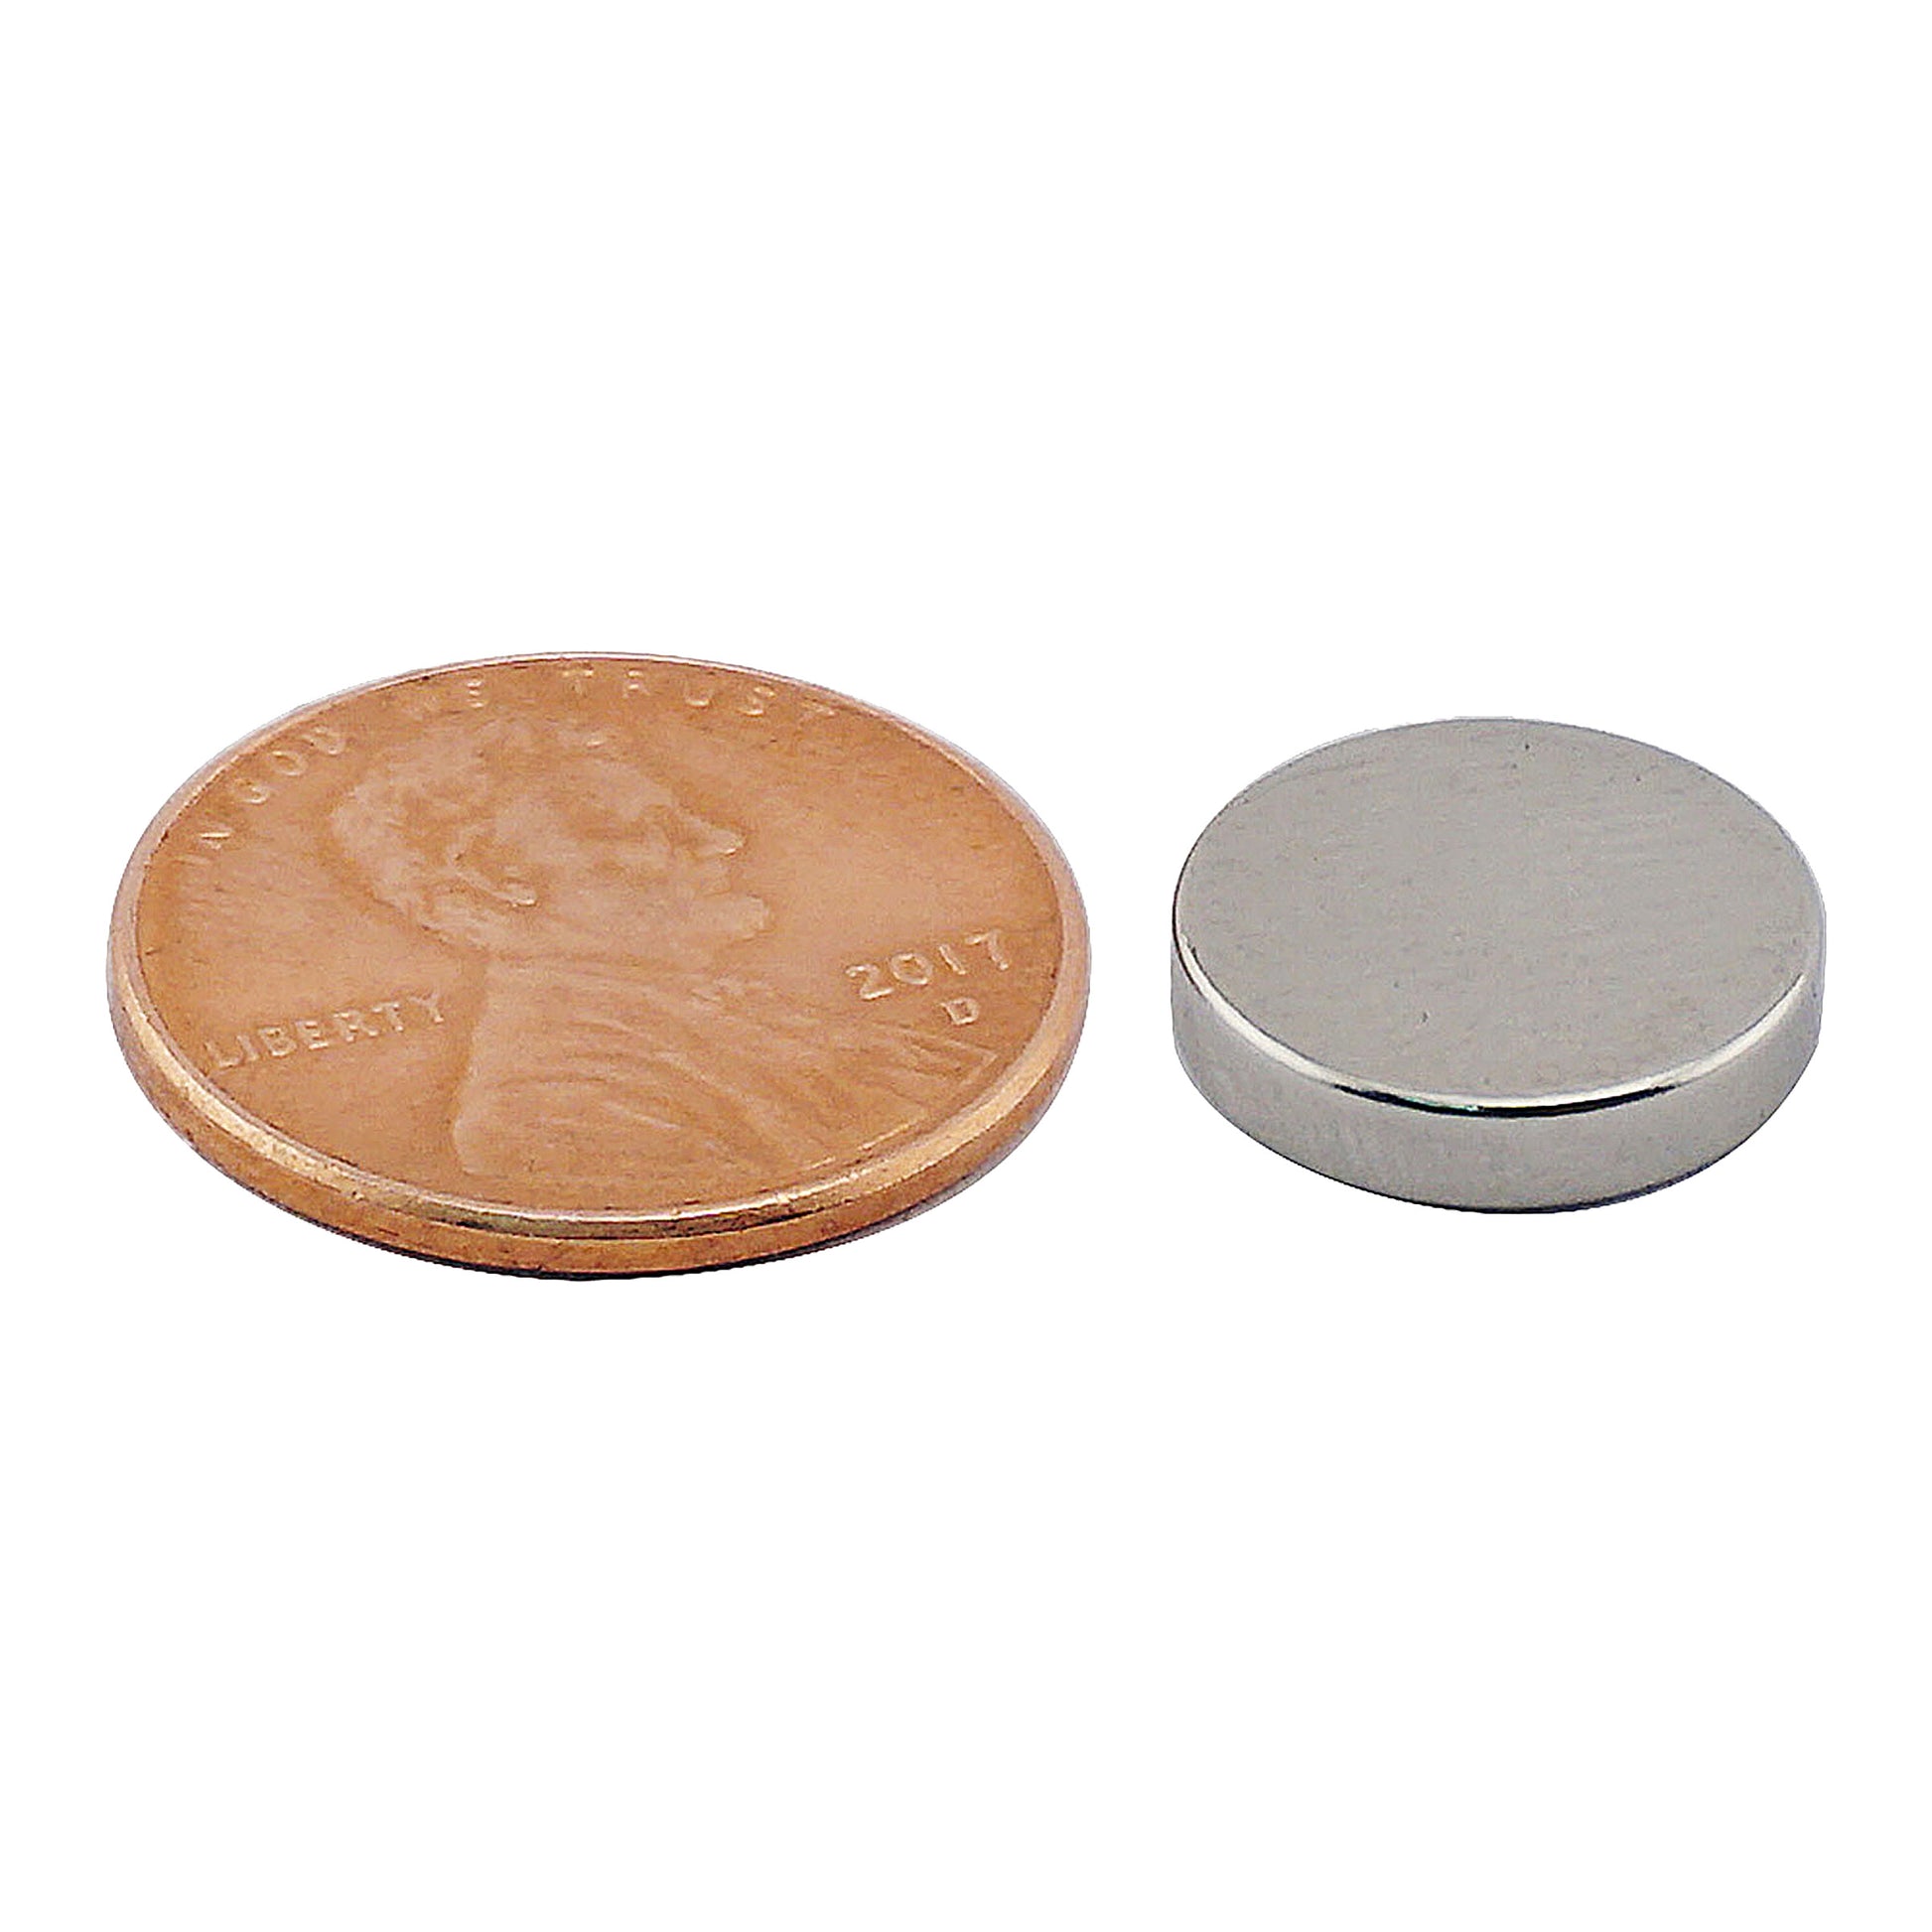 Load image into Gallery viewer, ND45-4910N Neodymium Disc Magnet - Compared to Penny for Size Reference